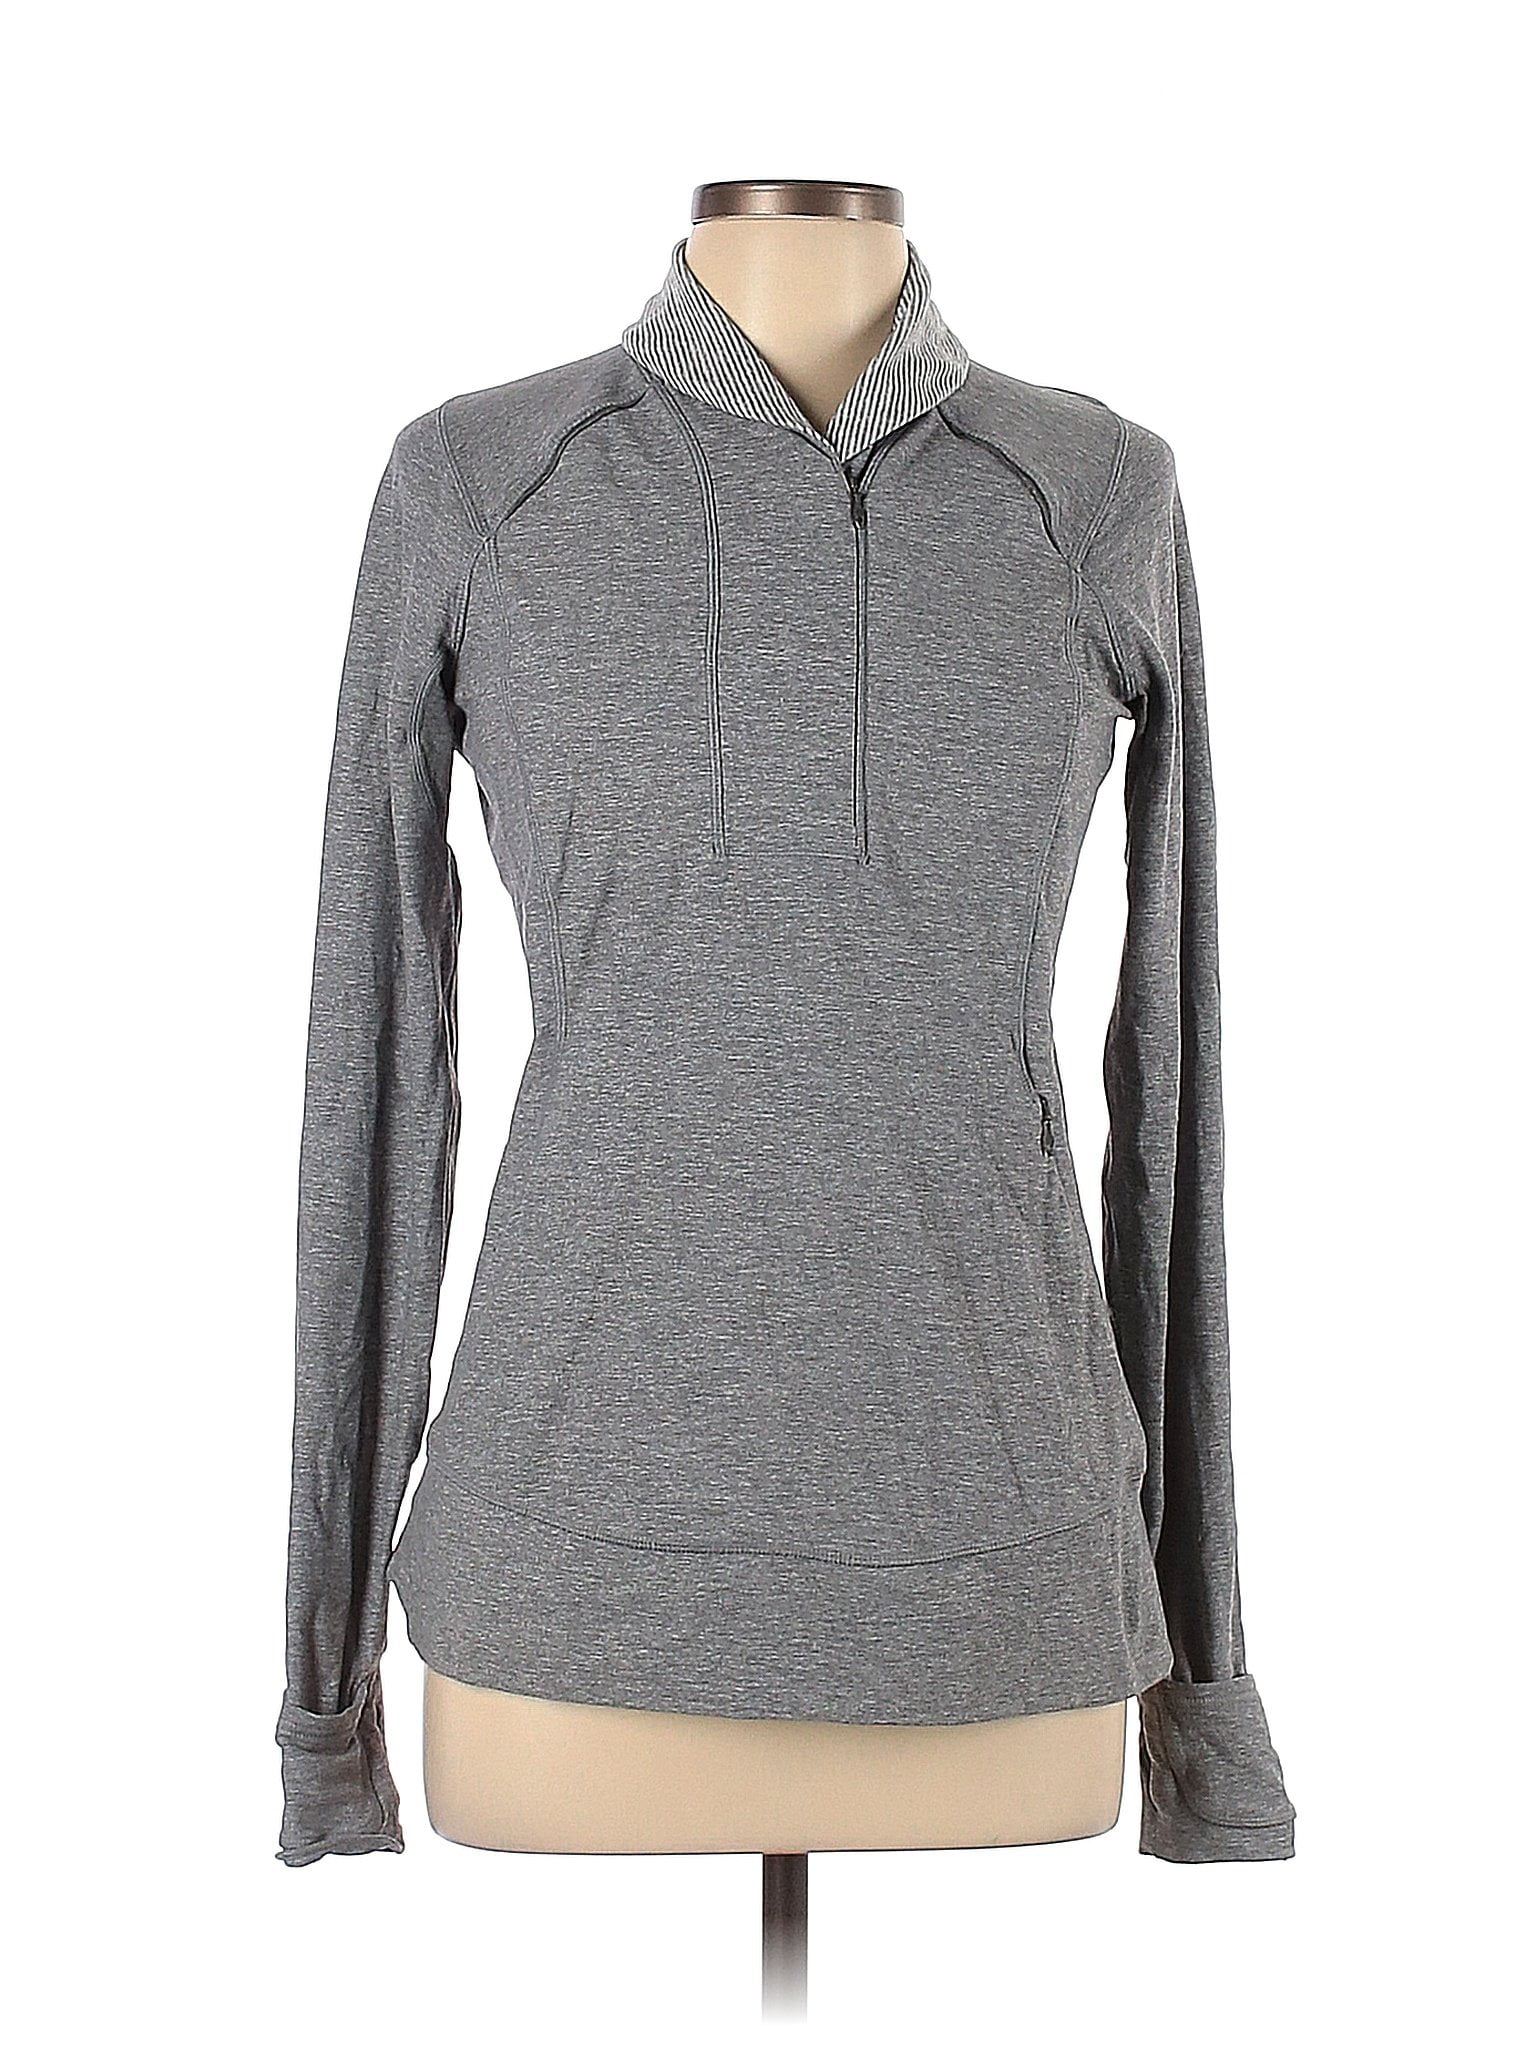 Pre-Owned Lululemon Athletica Womens Size 10 Track Ghana